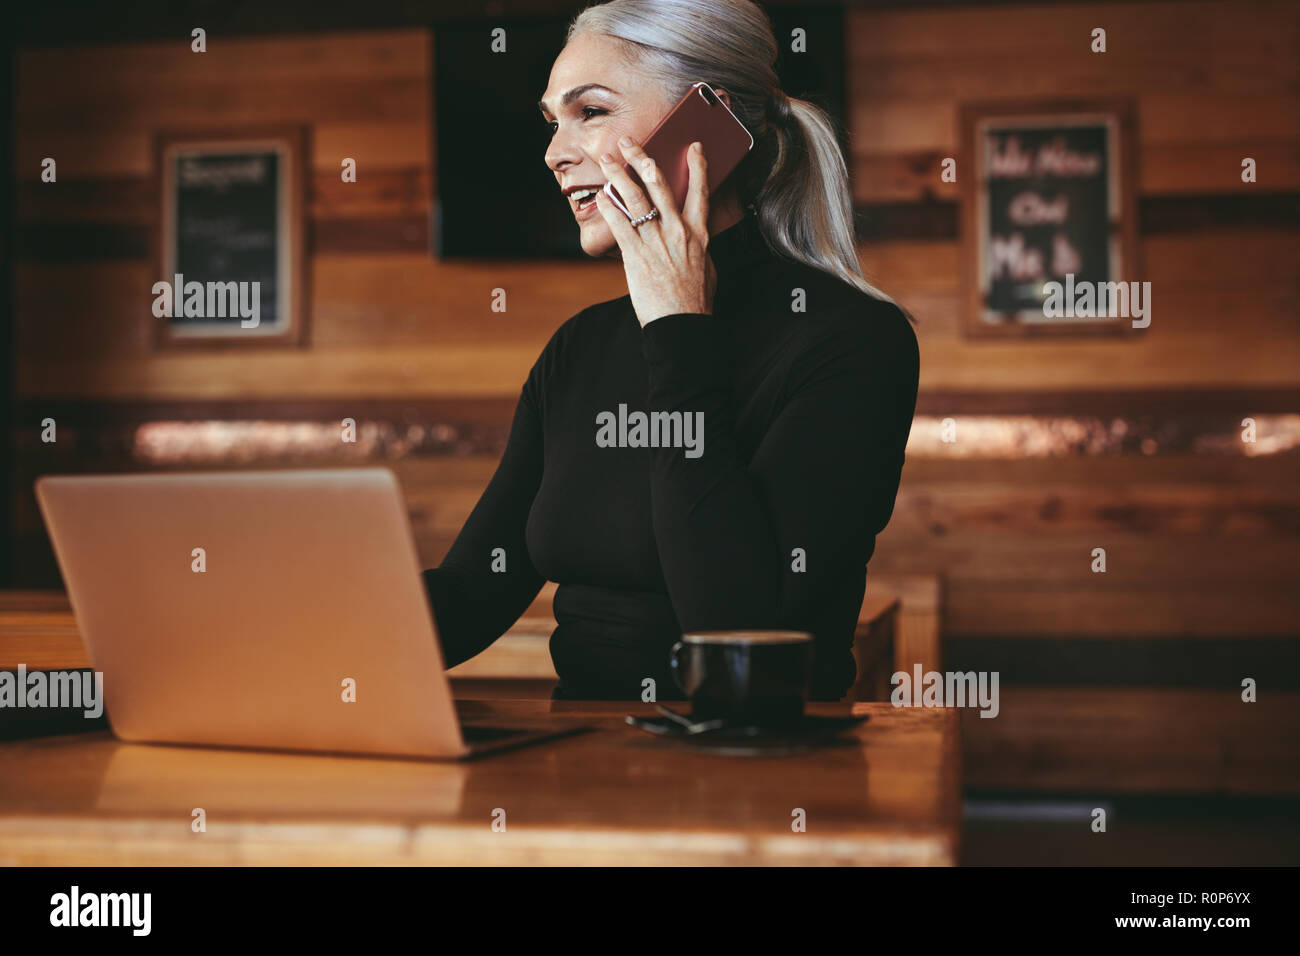 Beautiful senior businesswoman sitting at cafe having telephonic conversation with client. Mature female business professional talking on mobile phone Stock Photo